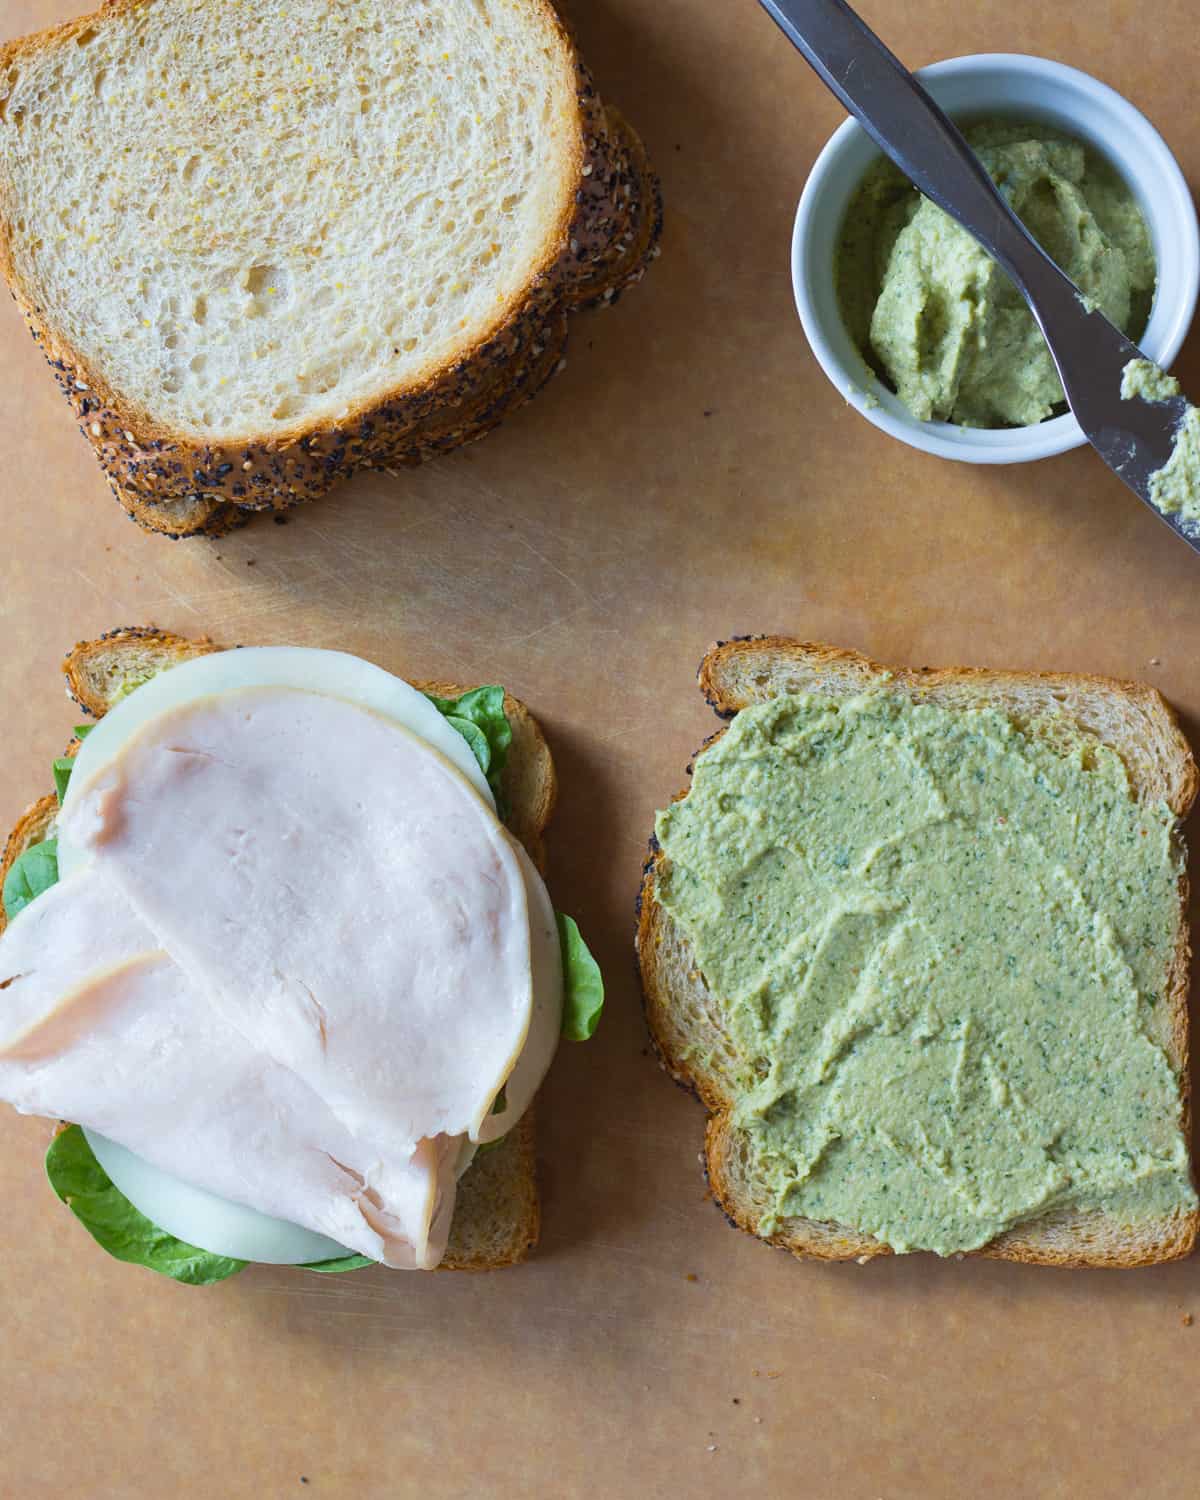 sandwich slice with pesto spread and another slice with lettuce, cheese, and turkey.